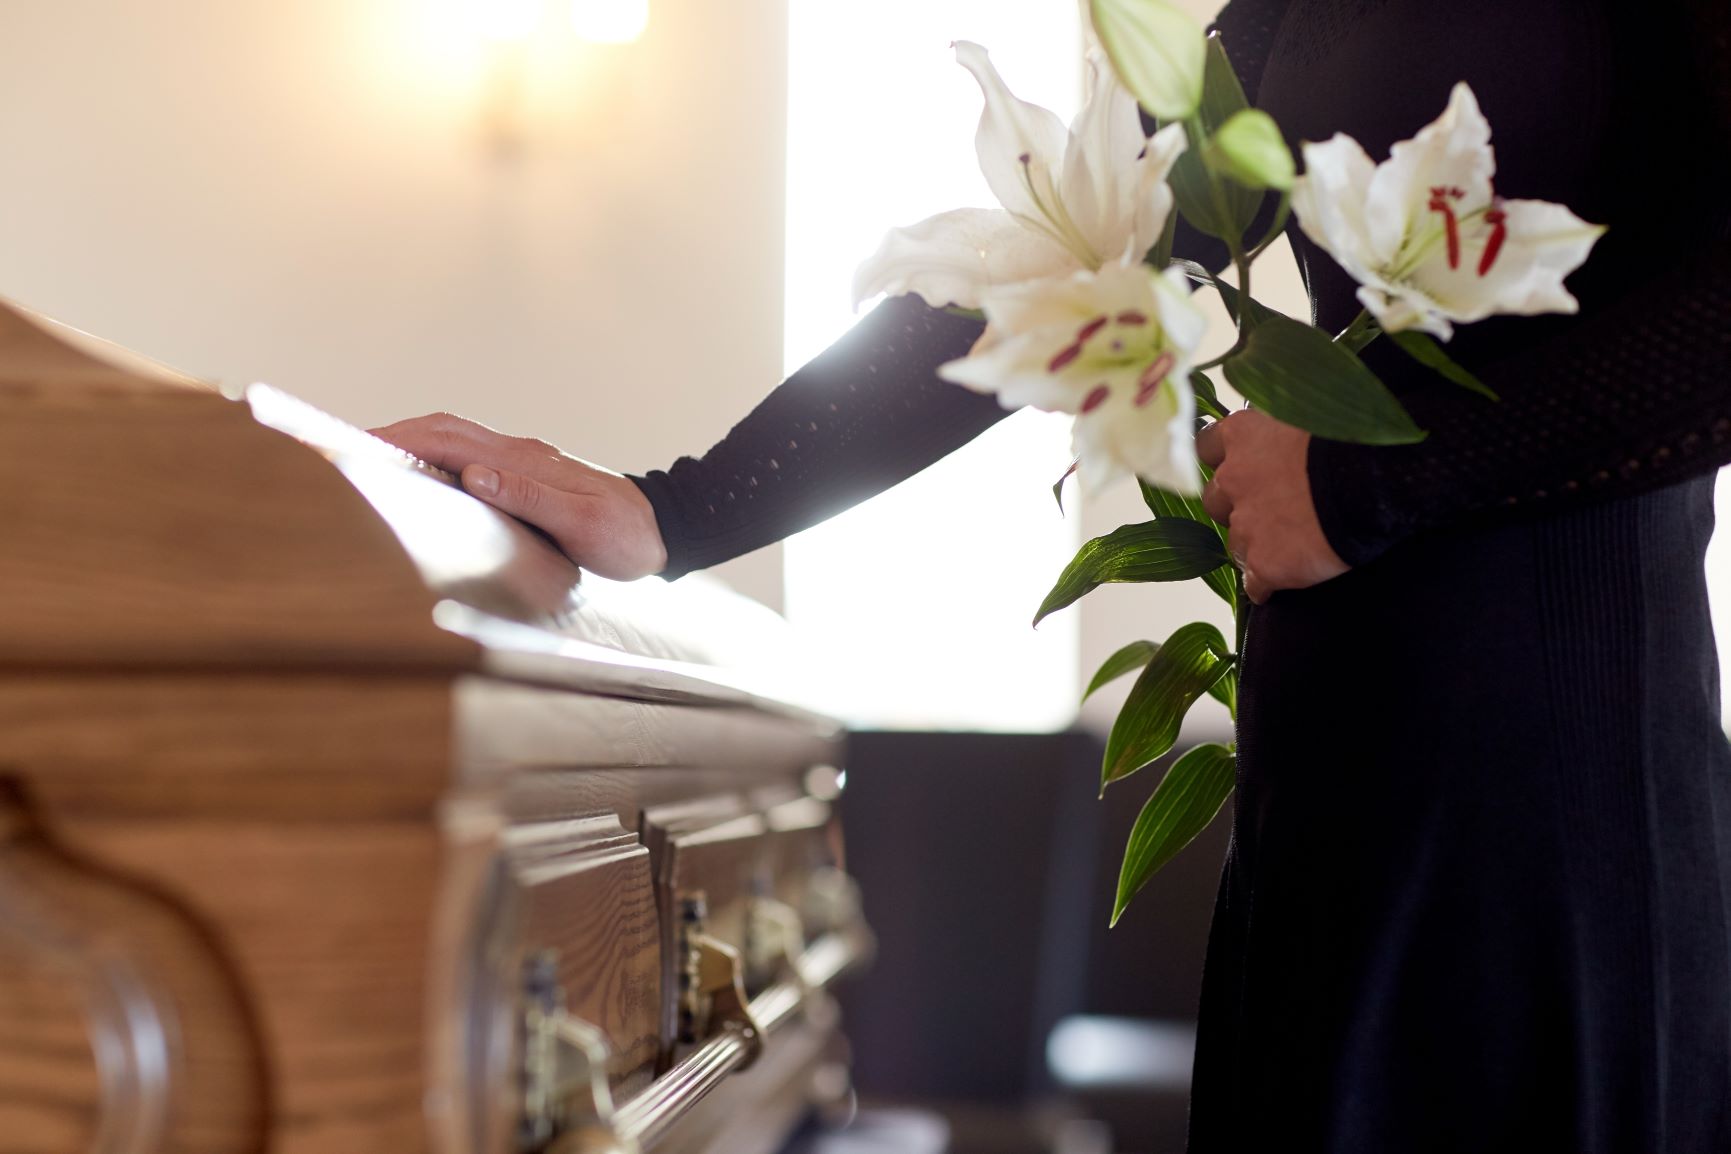 Wrongful Death Attorney in Missouri and Illinois